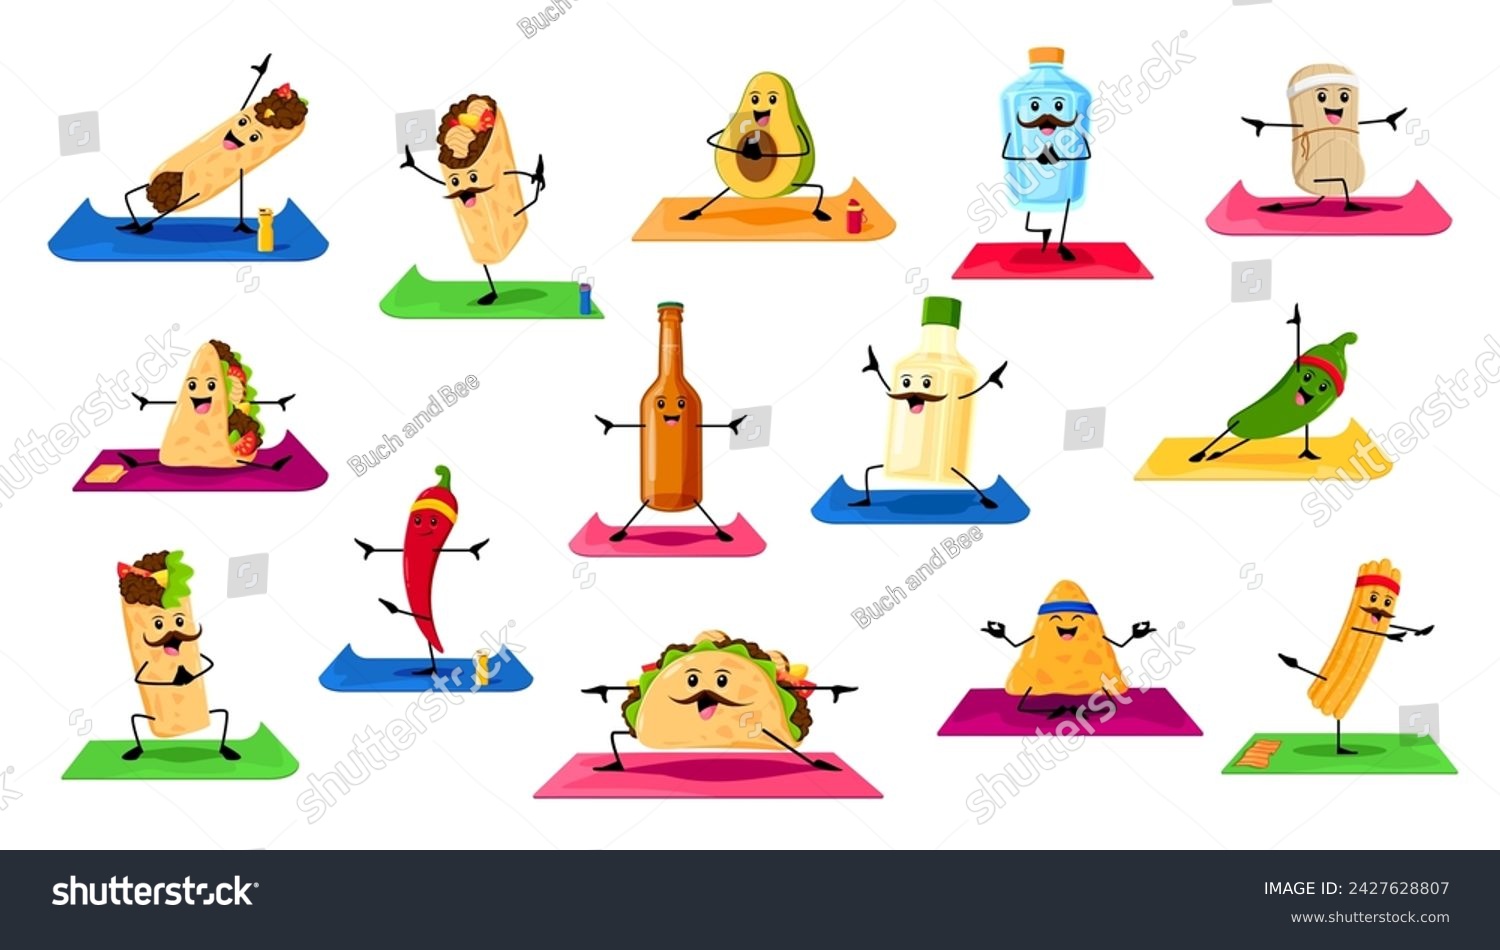 SVG of Cartoon tex mex mexican food and drinks characters on yoga fitness. Funny taco, burrito, nachos and quesadilla vector personages. Chili pepper, avocado, tequila, tamale and enchilada doing exercises svg